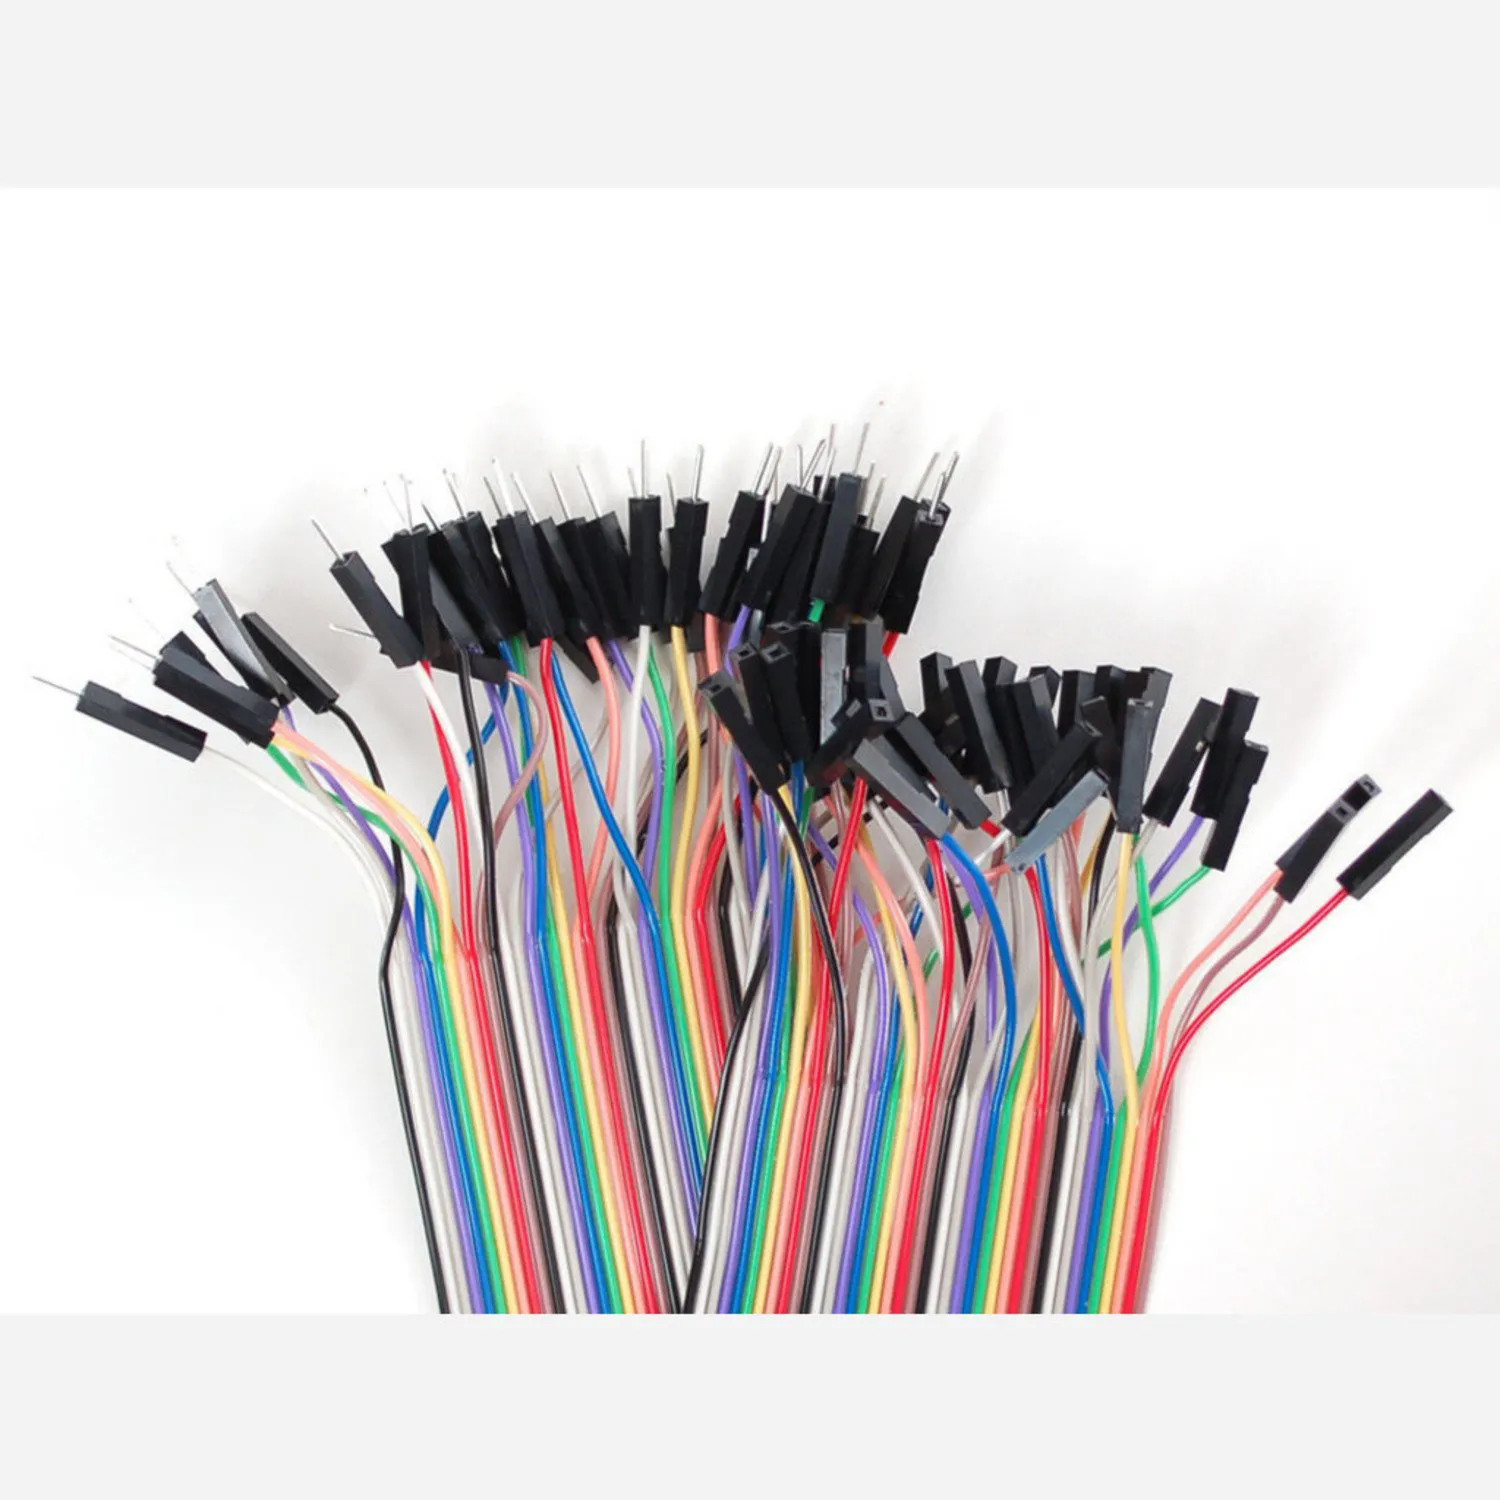 Photo of Premium Female/Male 'Extension' Jumper Wires - 40 x 6 (150mm)